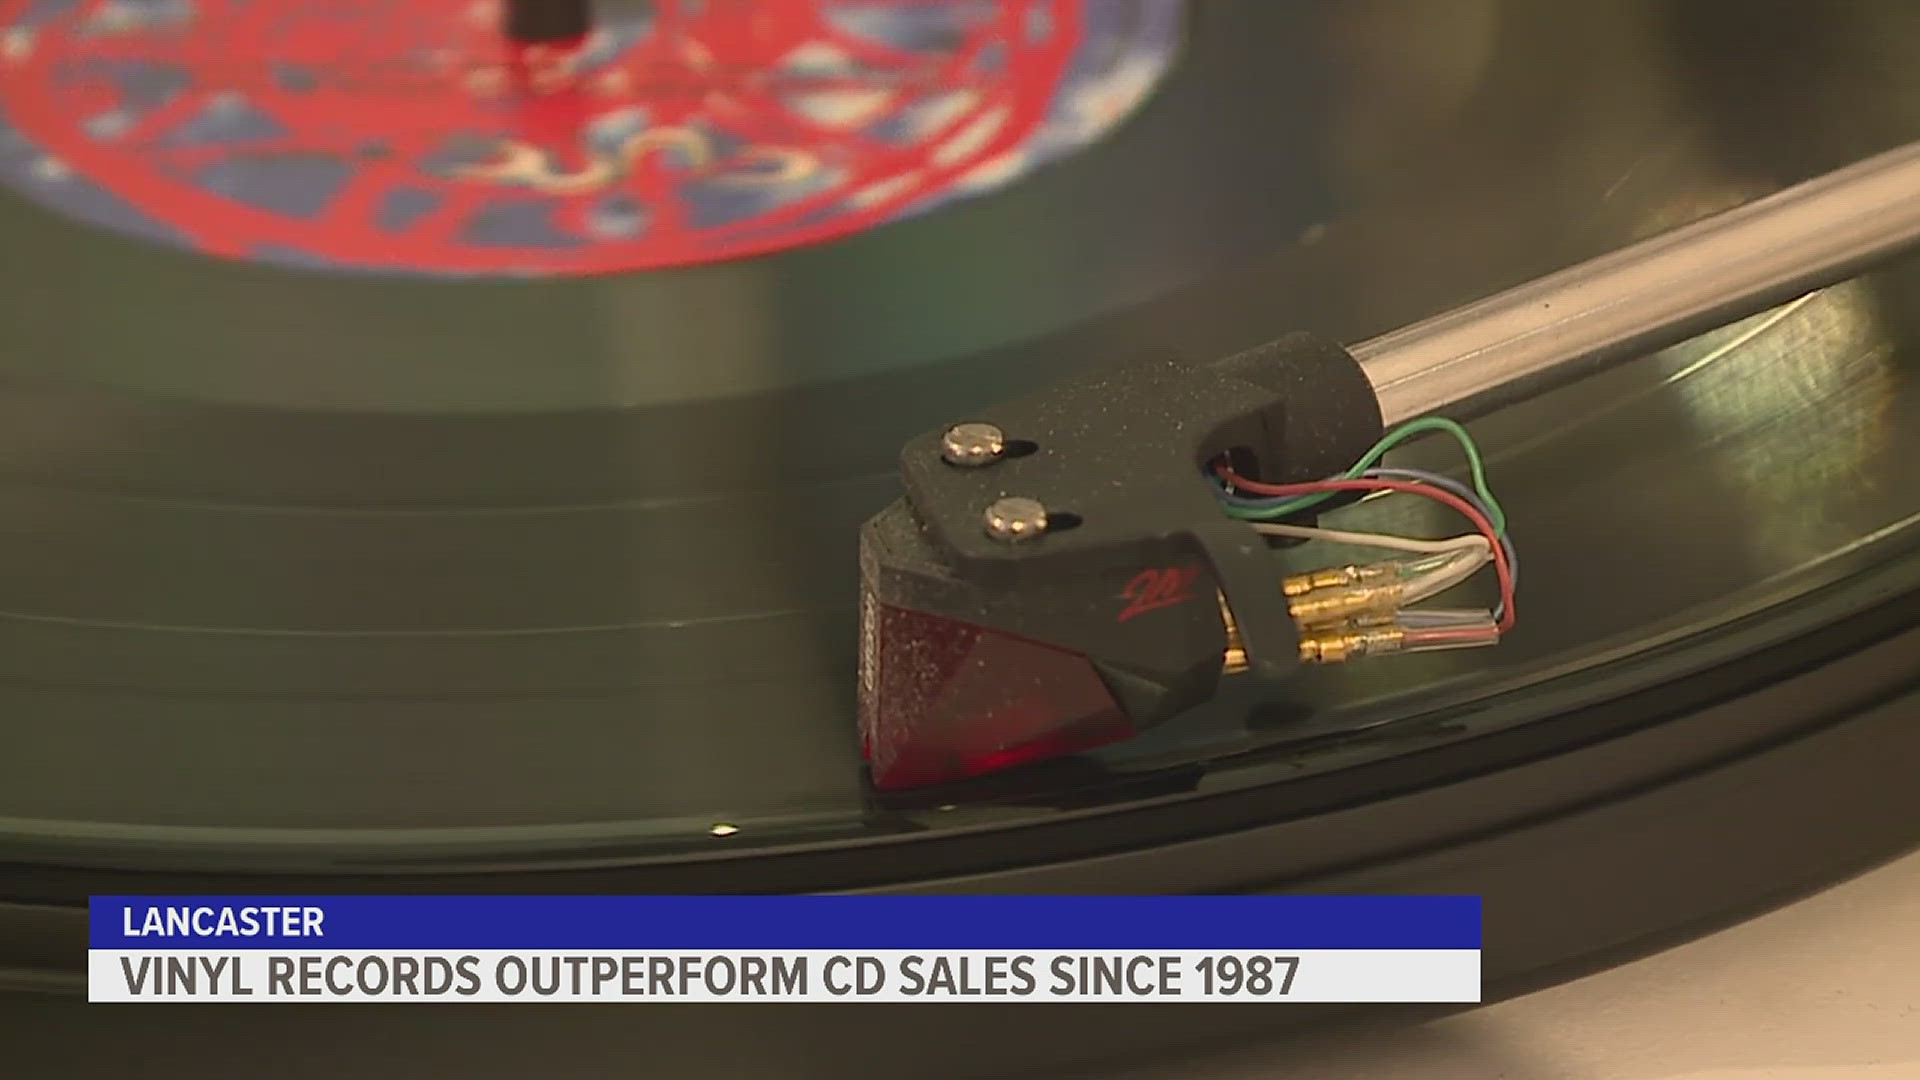 More people are buying records in 2022 according to new report from Recording Industry Association of America.